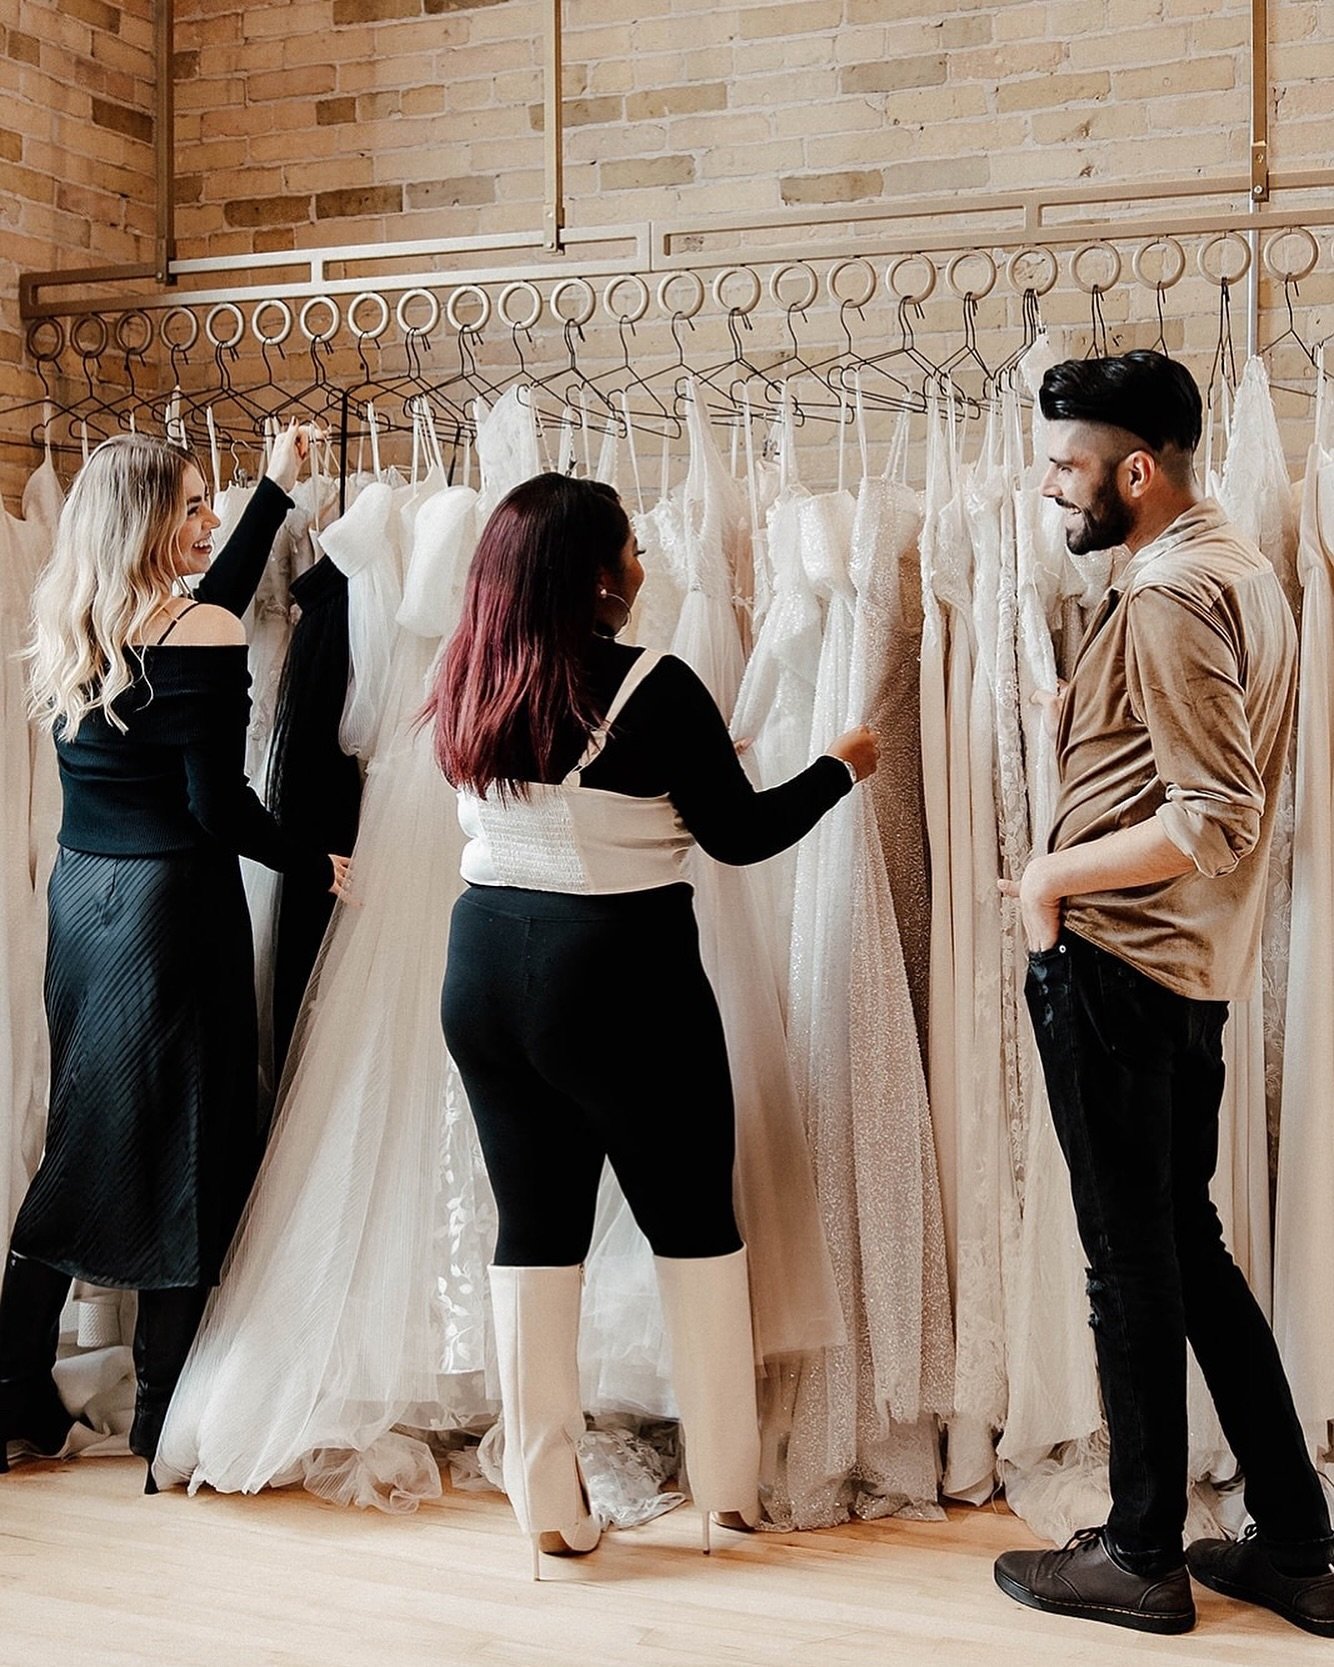 happy earth day! 🌎 

did you know that the average wedding produces 400lbs of waste and 63 tons of carbon emissions? 🤯 at strike bridal bar, we&rsquo;re proud to partner with small designers who prioritize cutting down on waste. 

🌱 each of our de